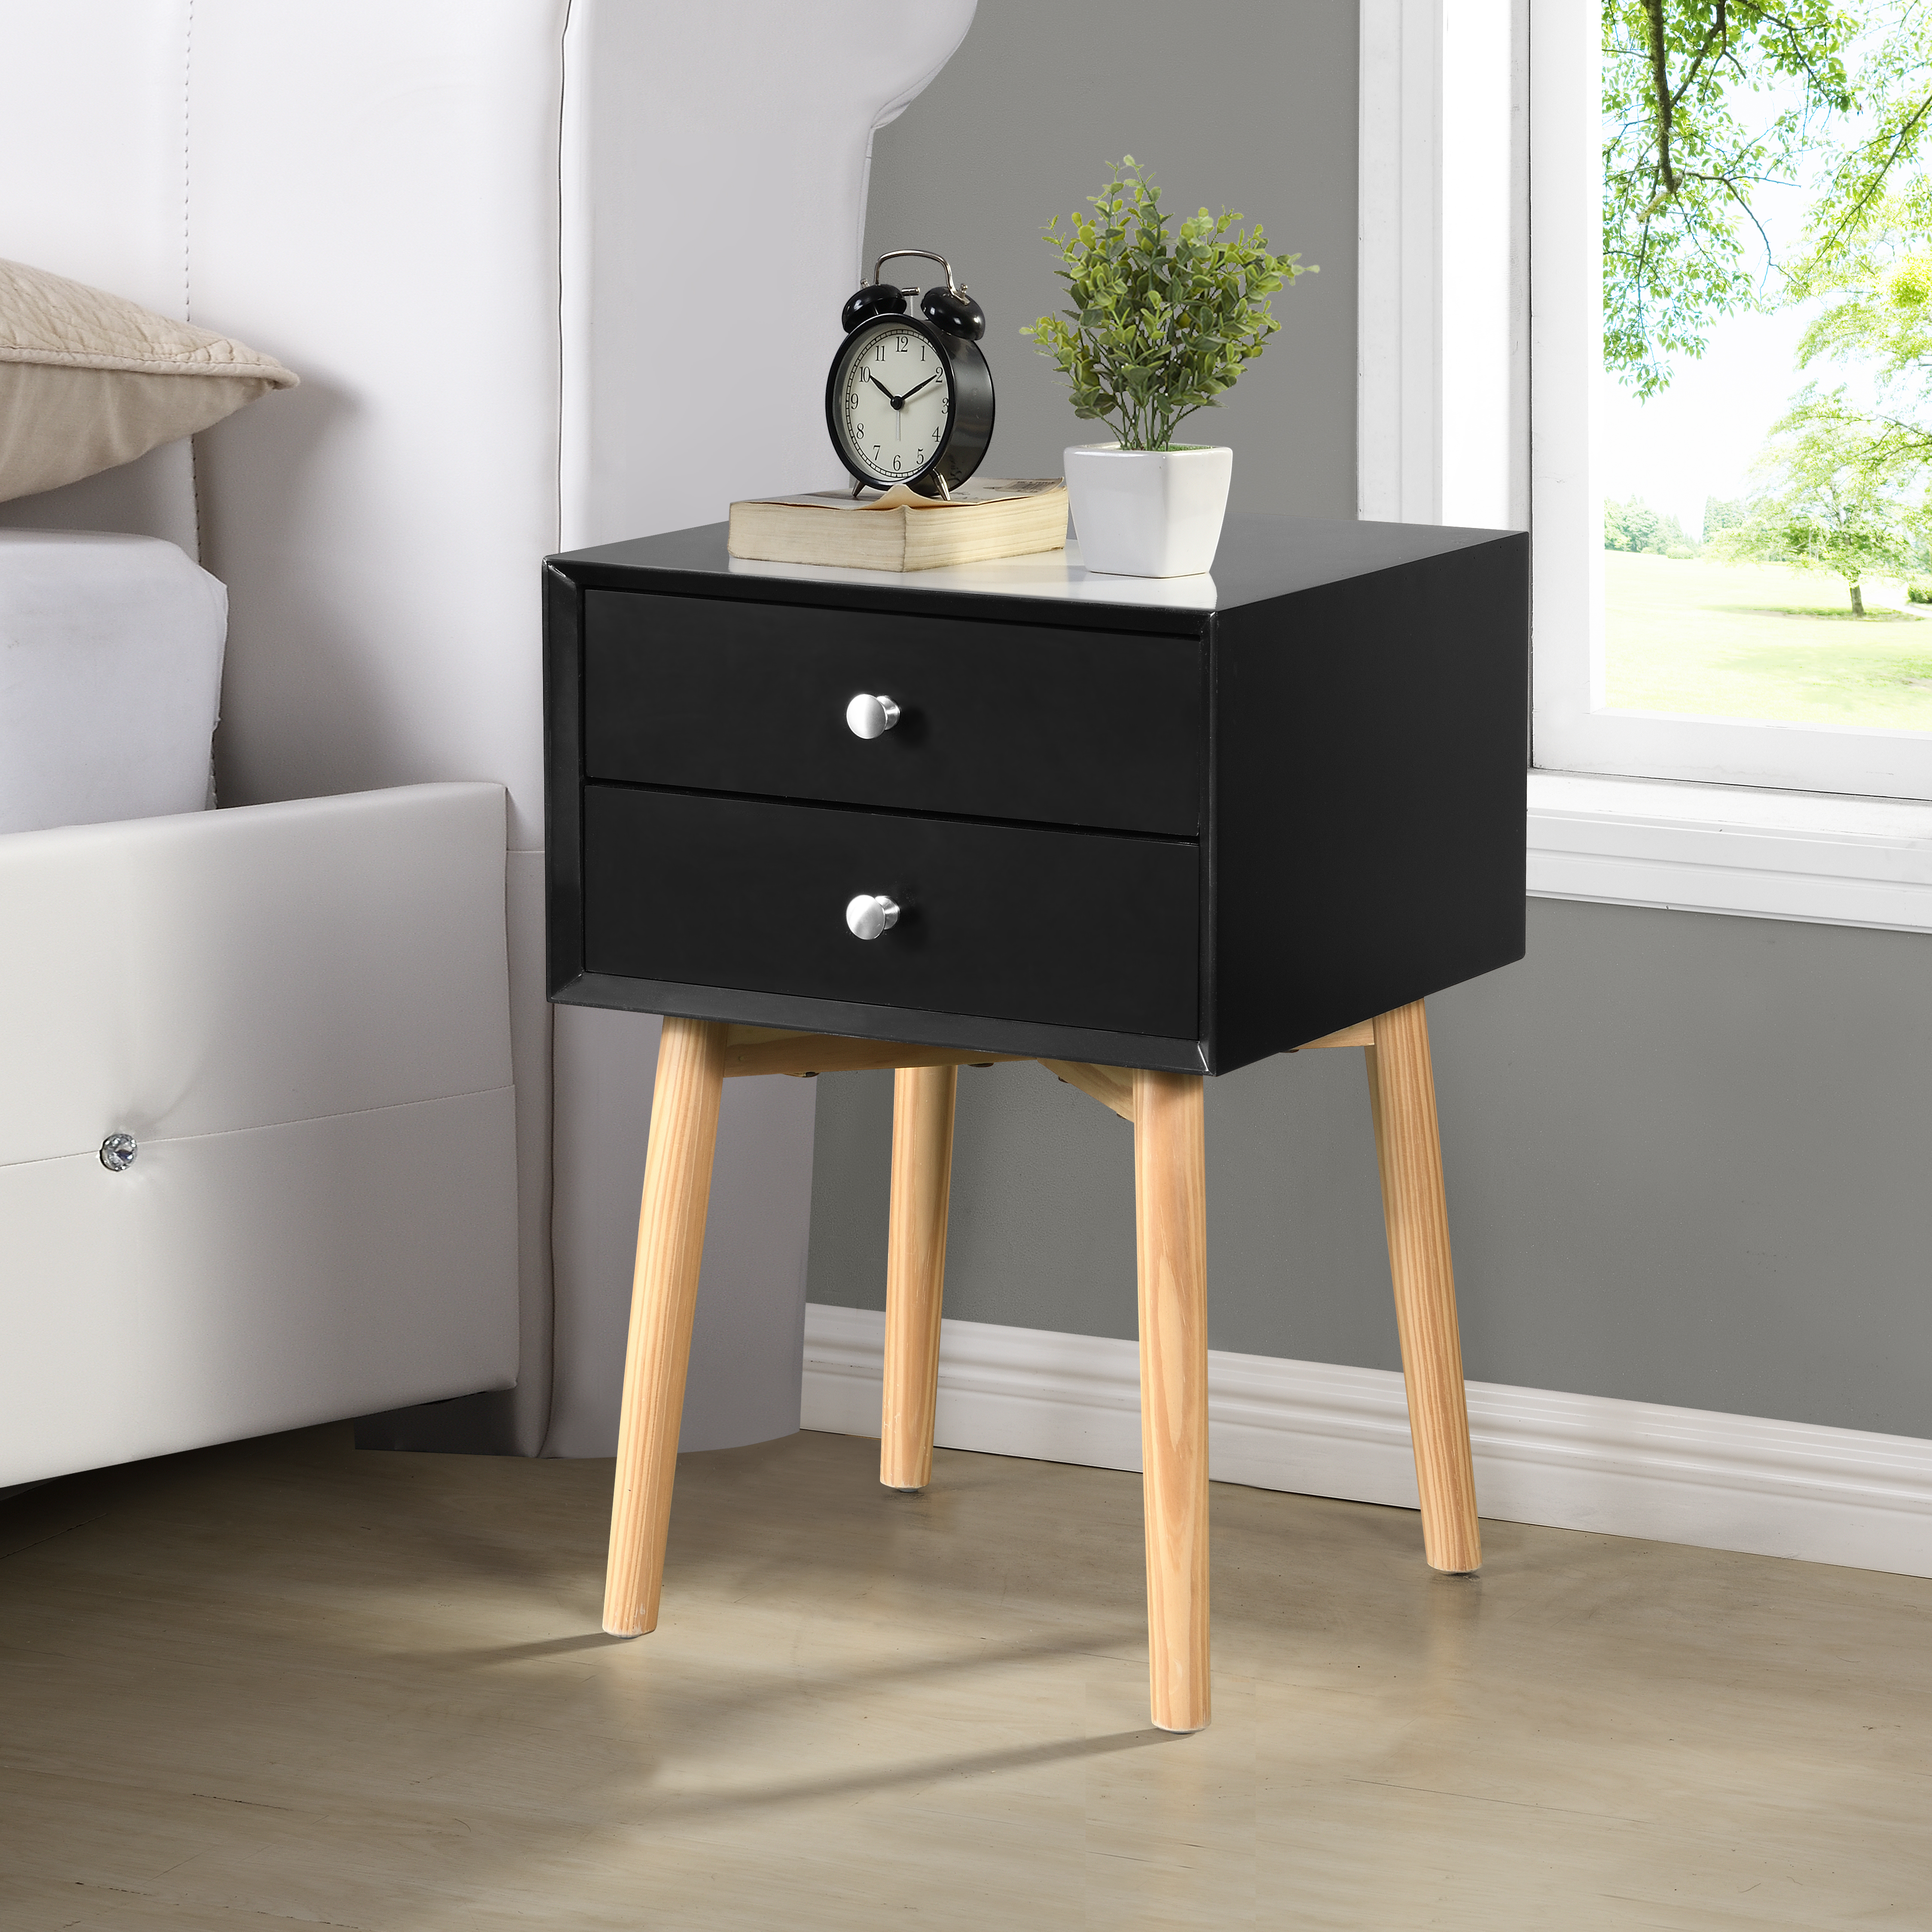 Side Table with 2 Drawer and Rubber Wood Legs, Mid-Century Modern Storage Cabinet for Bedroom Living Room Furniture, Black-CASAINC